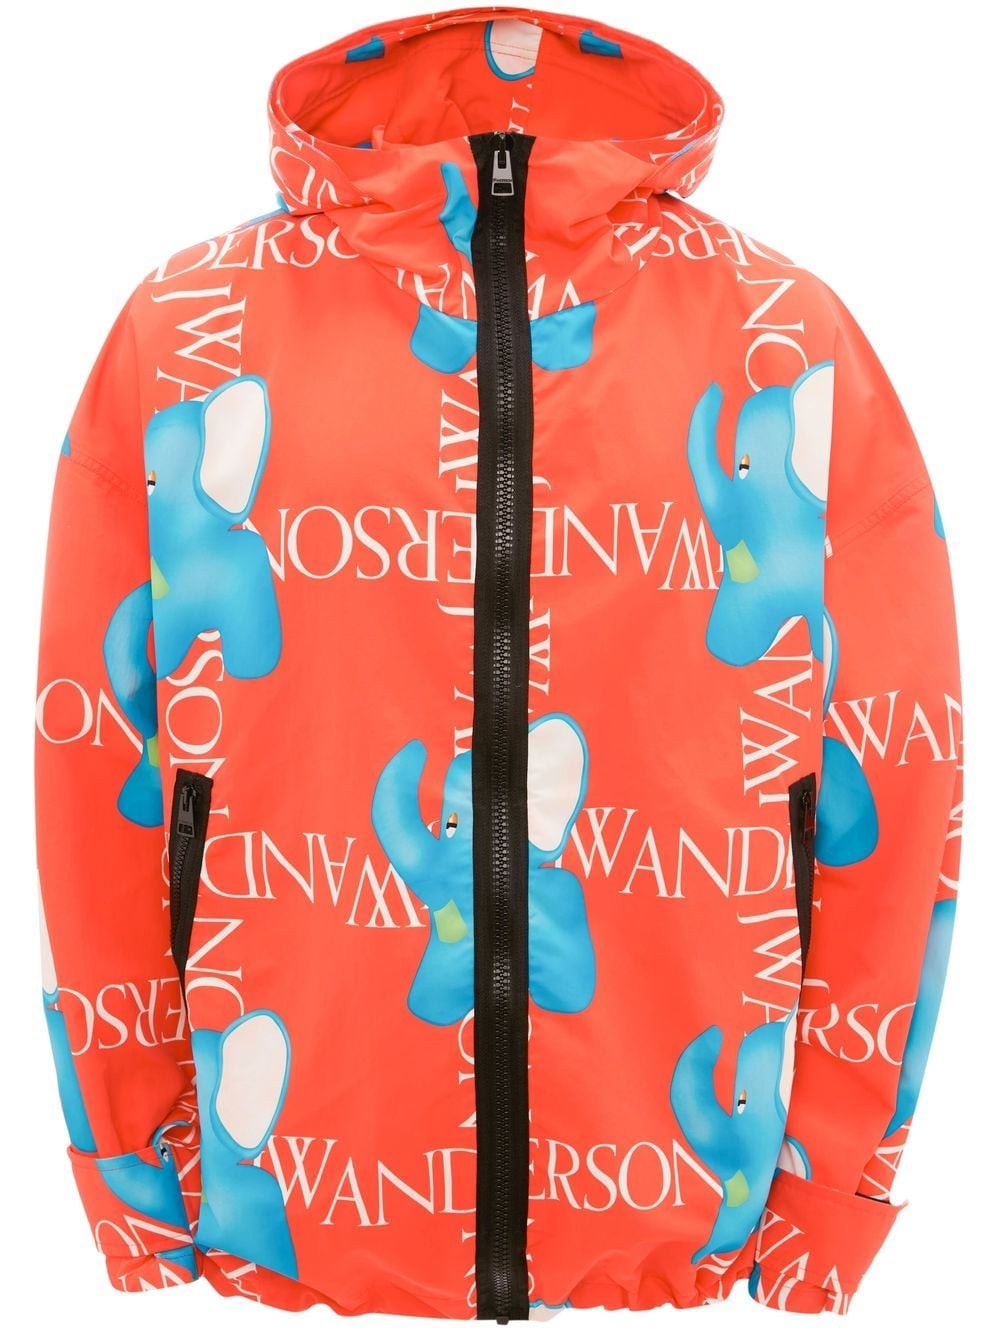 JW Anderson elephant-print oversized hooded jacket - Red